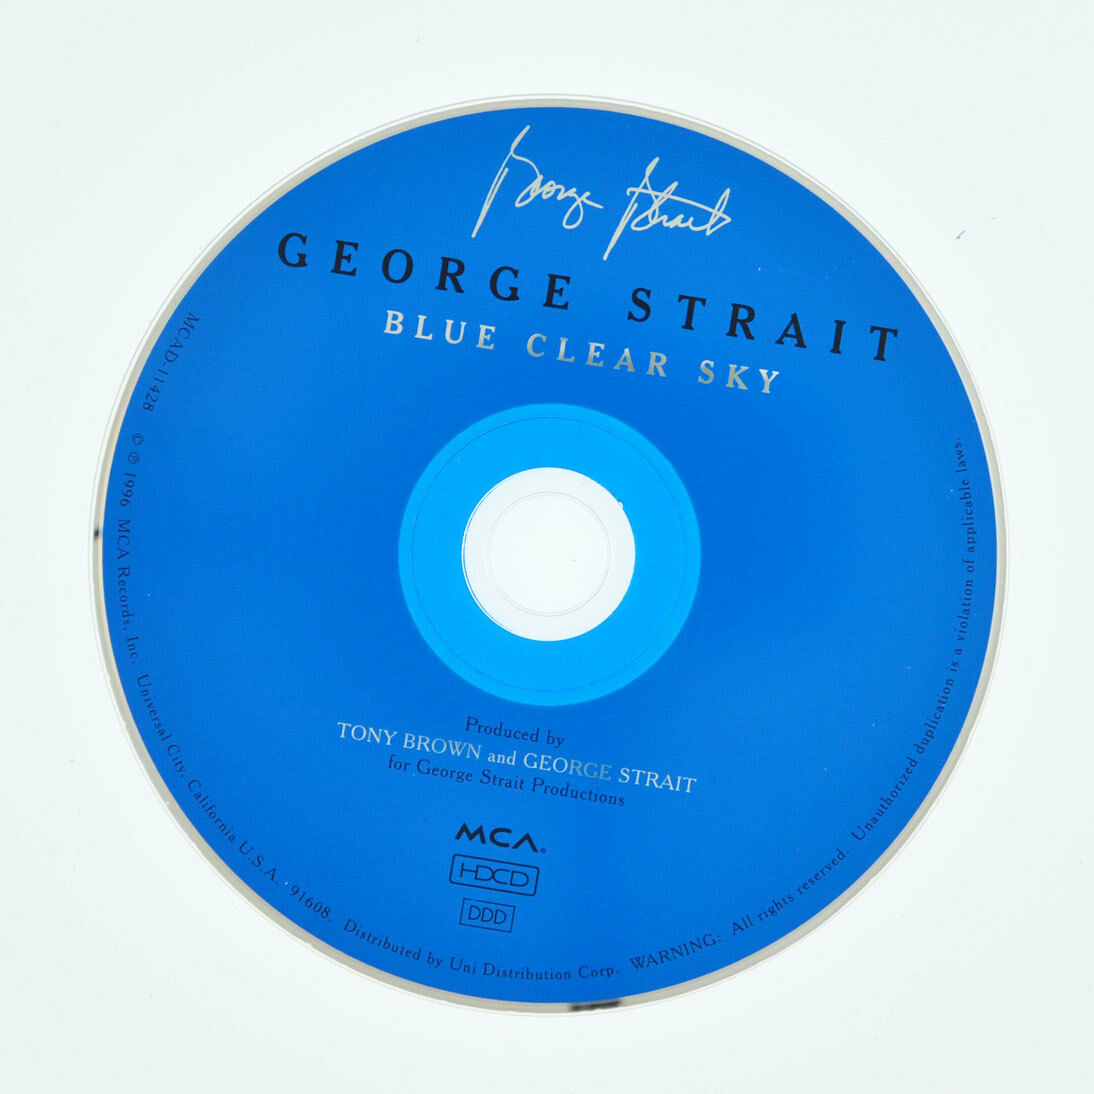 Blue Clear Sky by George Strait (CD, Apr-1996, MCA) DISC ONLY